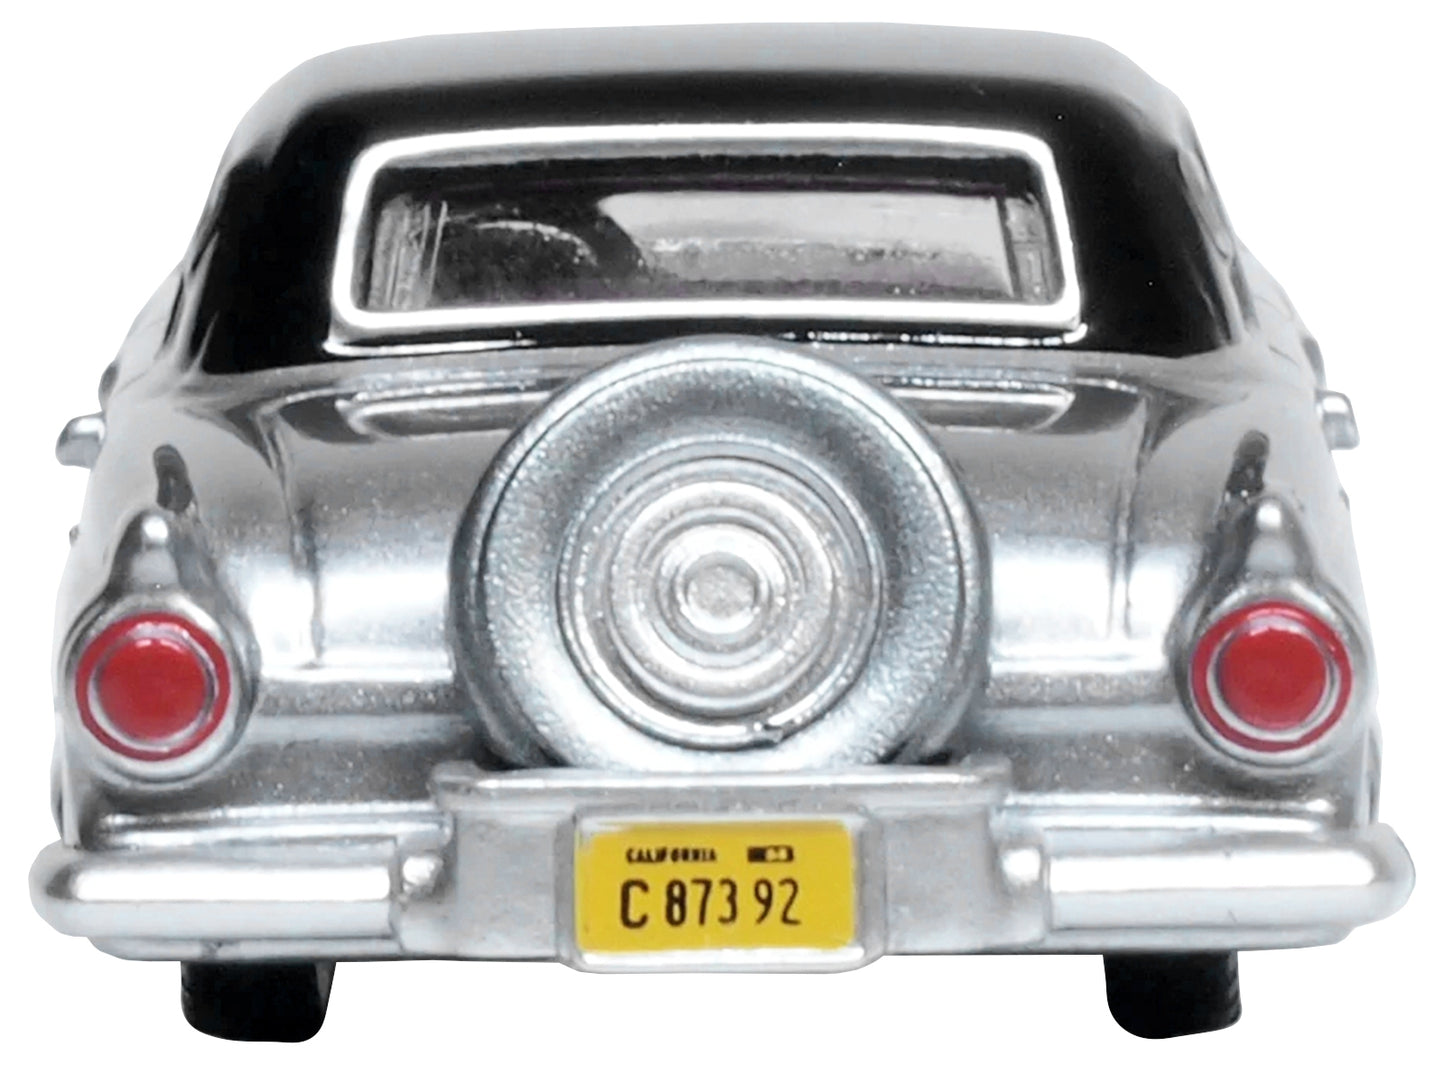 1956 Ford Thunderbird Gray Metallic with Raven Black Top 1/87 (HO) Scale Diecast Model Car by Oxford Diecast